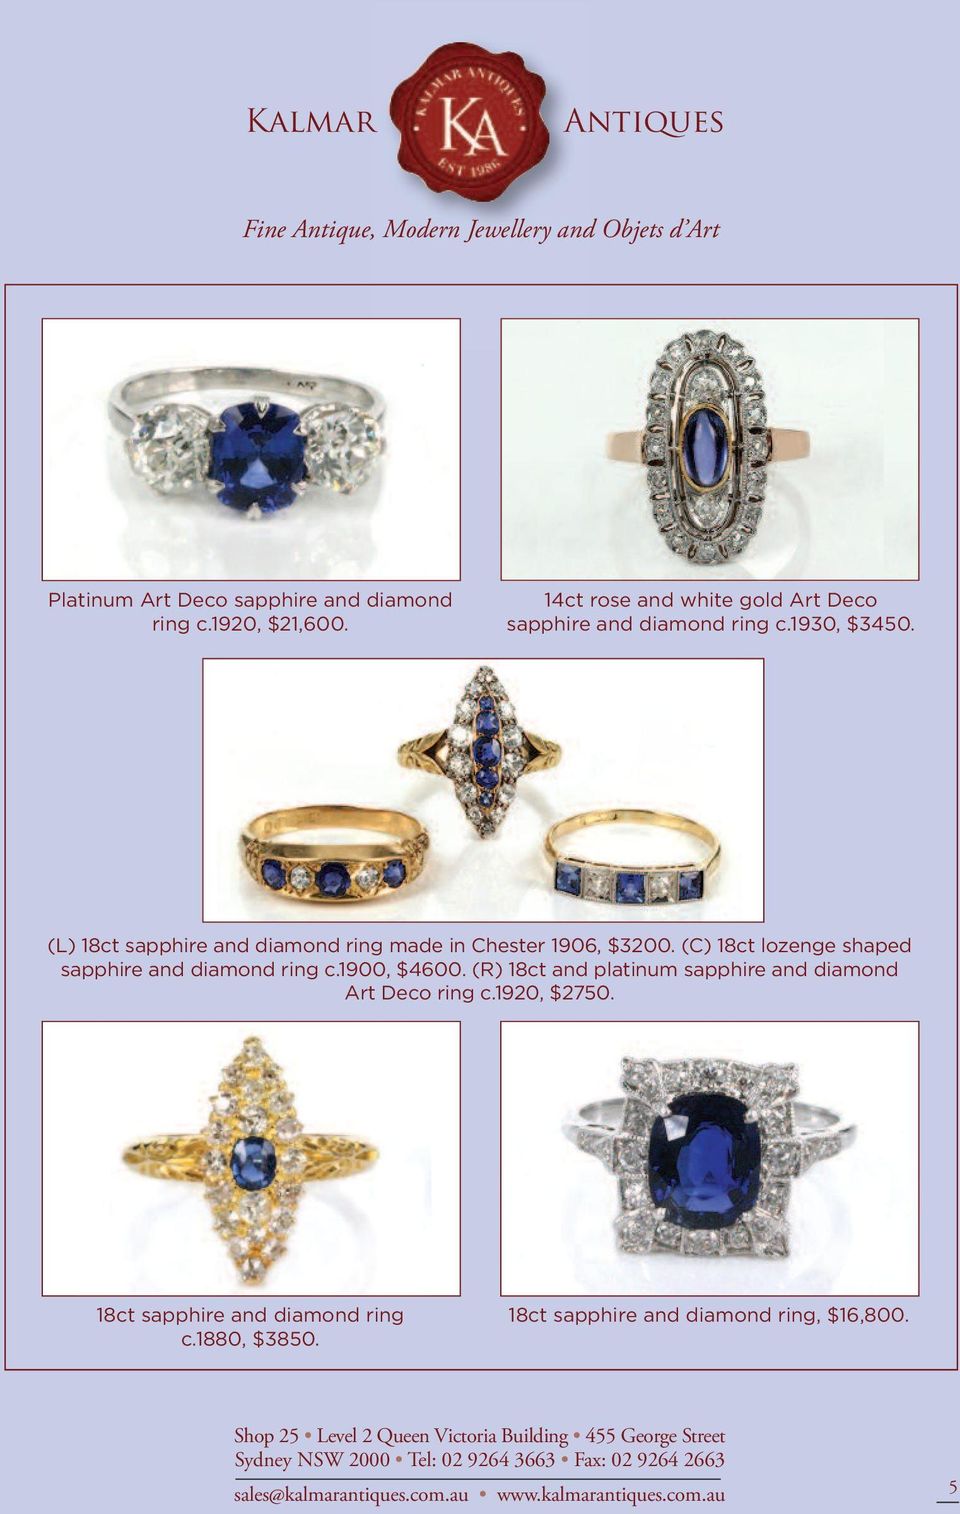 (L) 18ct sapphire and diamond ring made in Chester 1906, $3200.